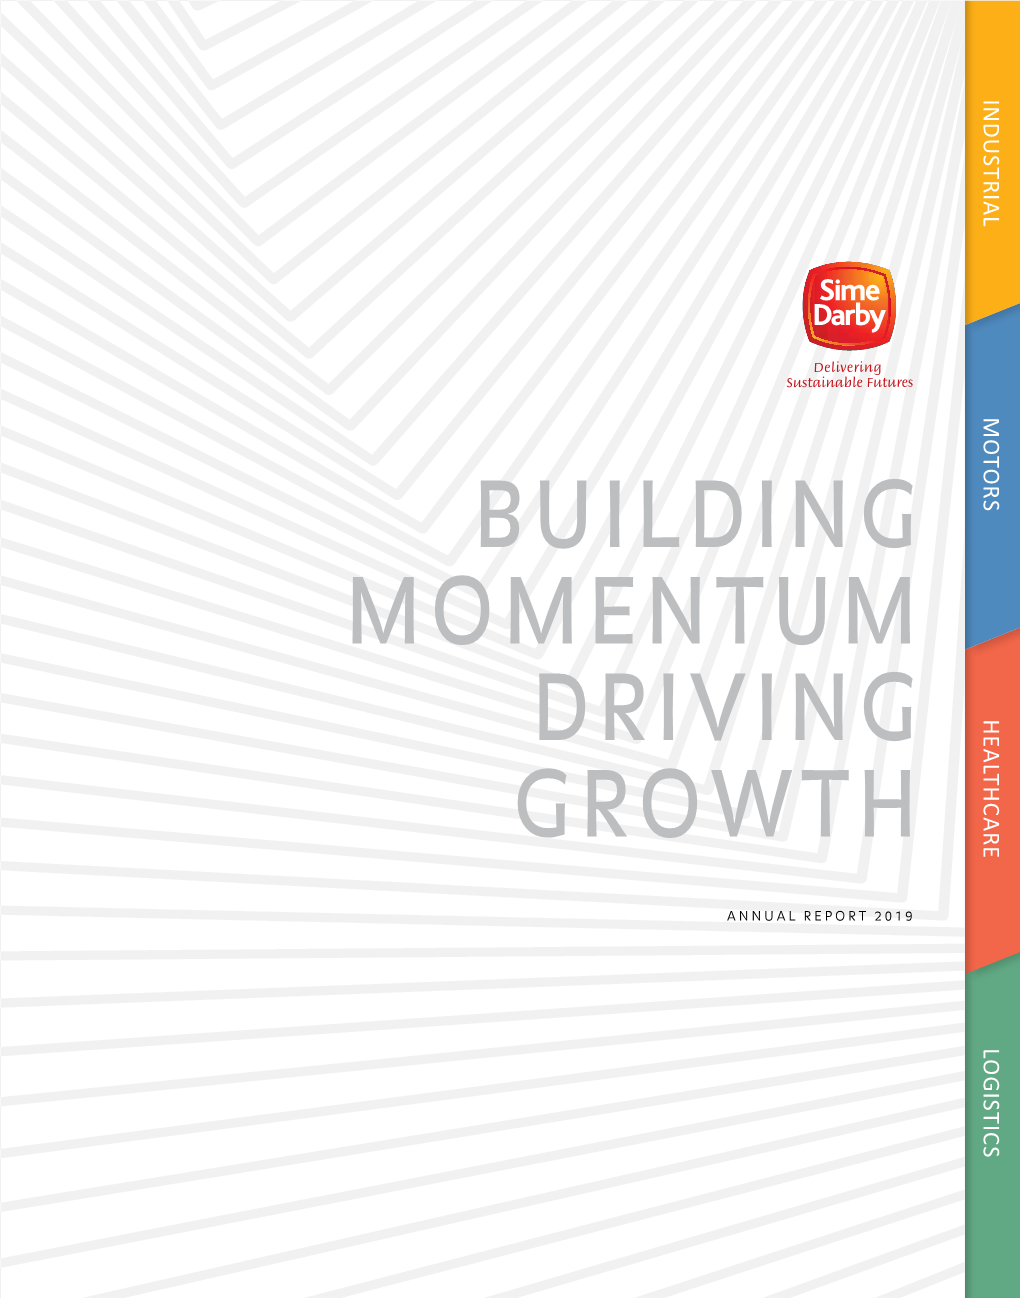 ANNUAL REPORT 2019 Sime Darby Turns 110 in 2020